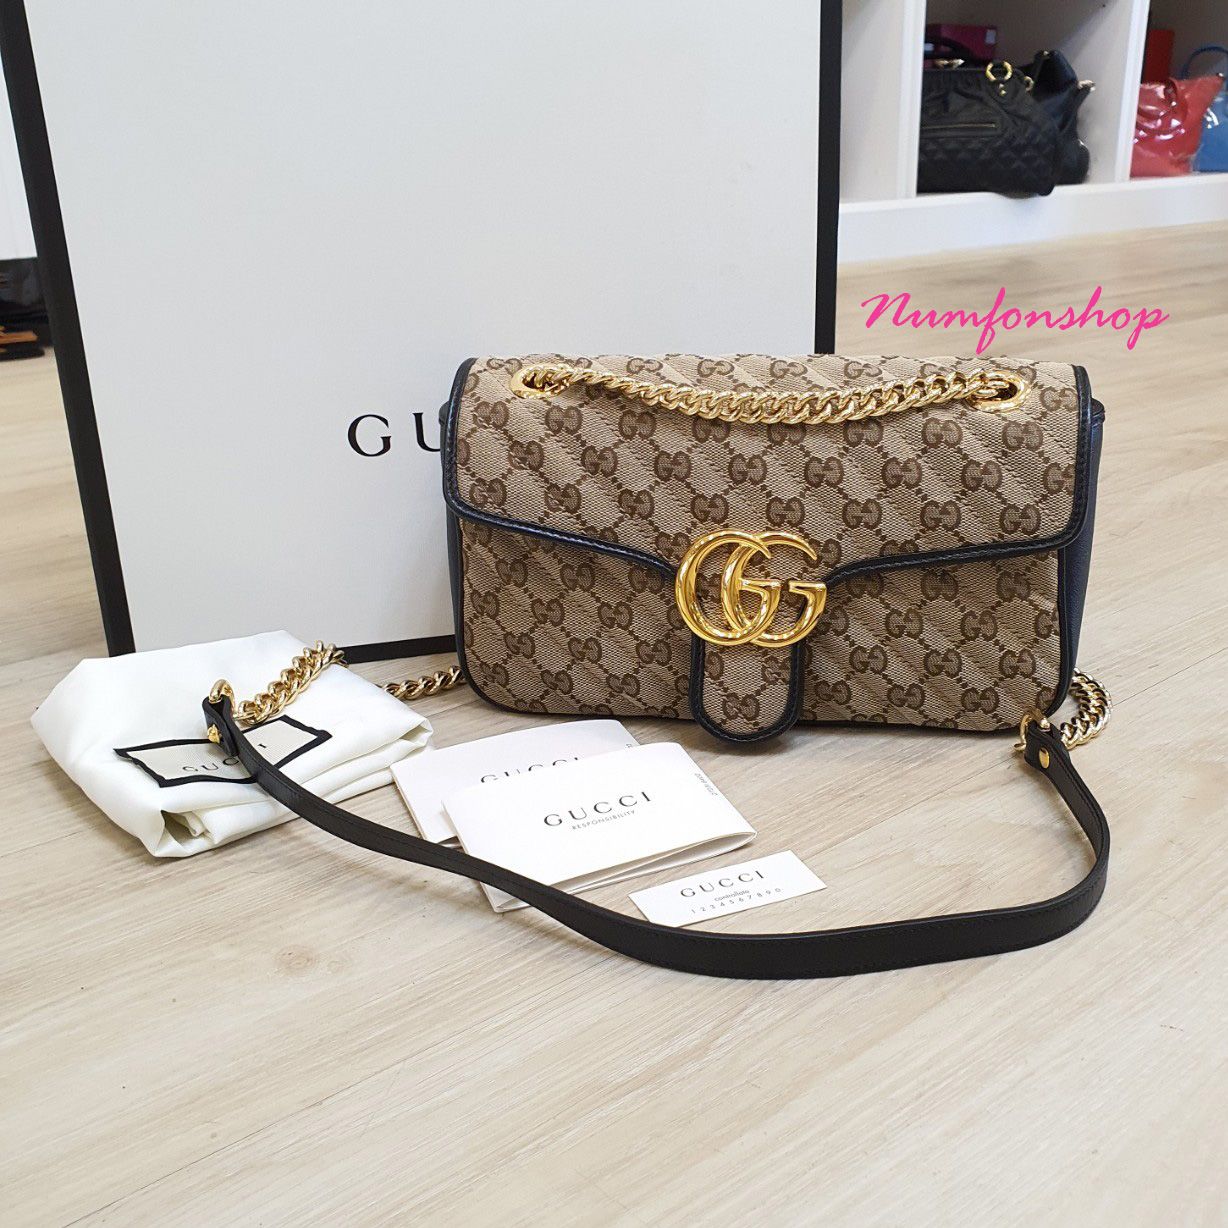 Sold Gucci Marmont 26 cm Used Like New